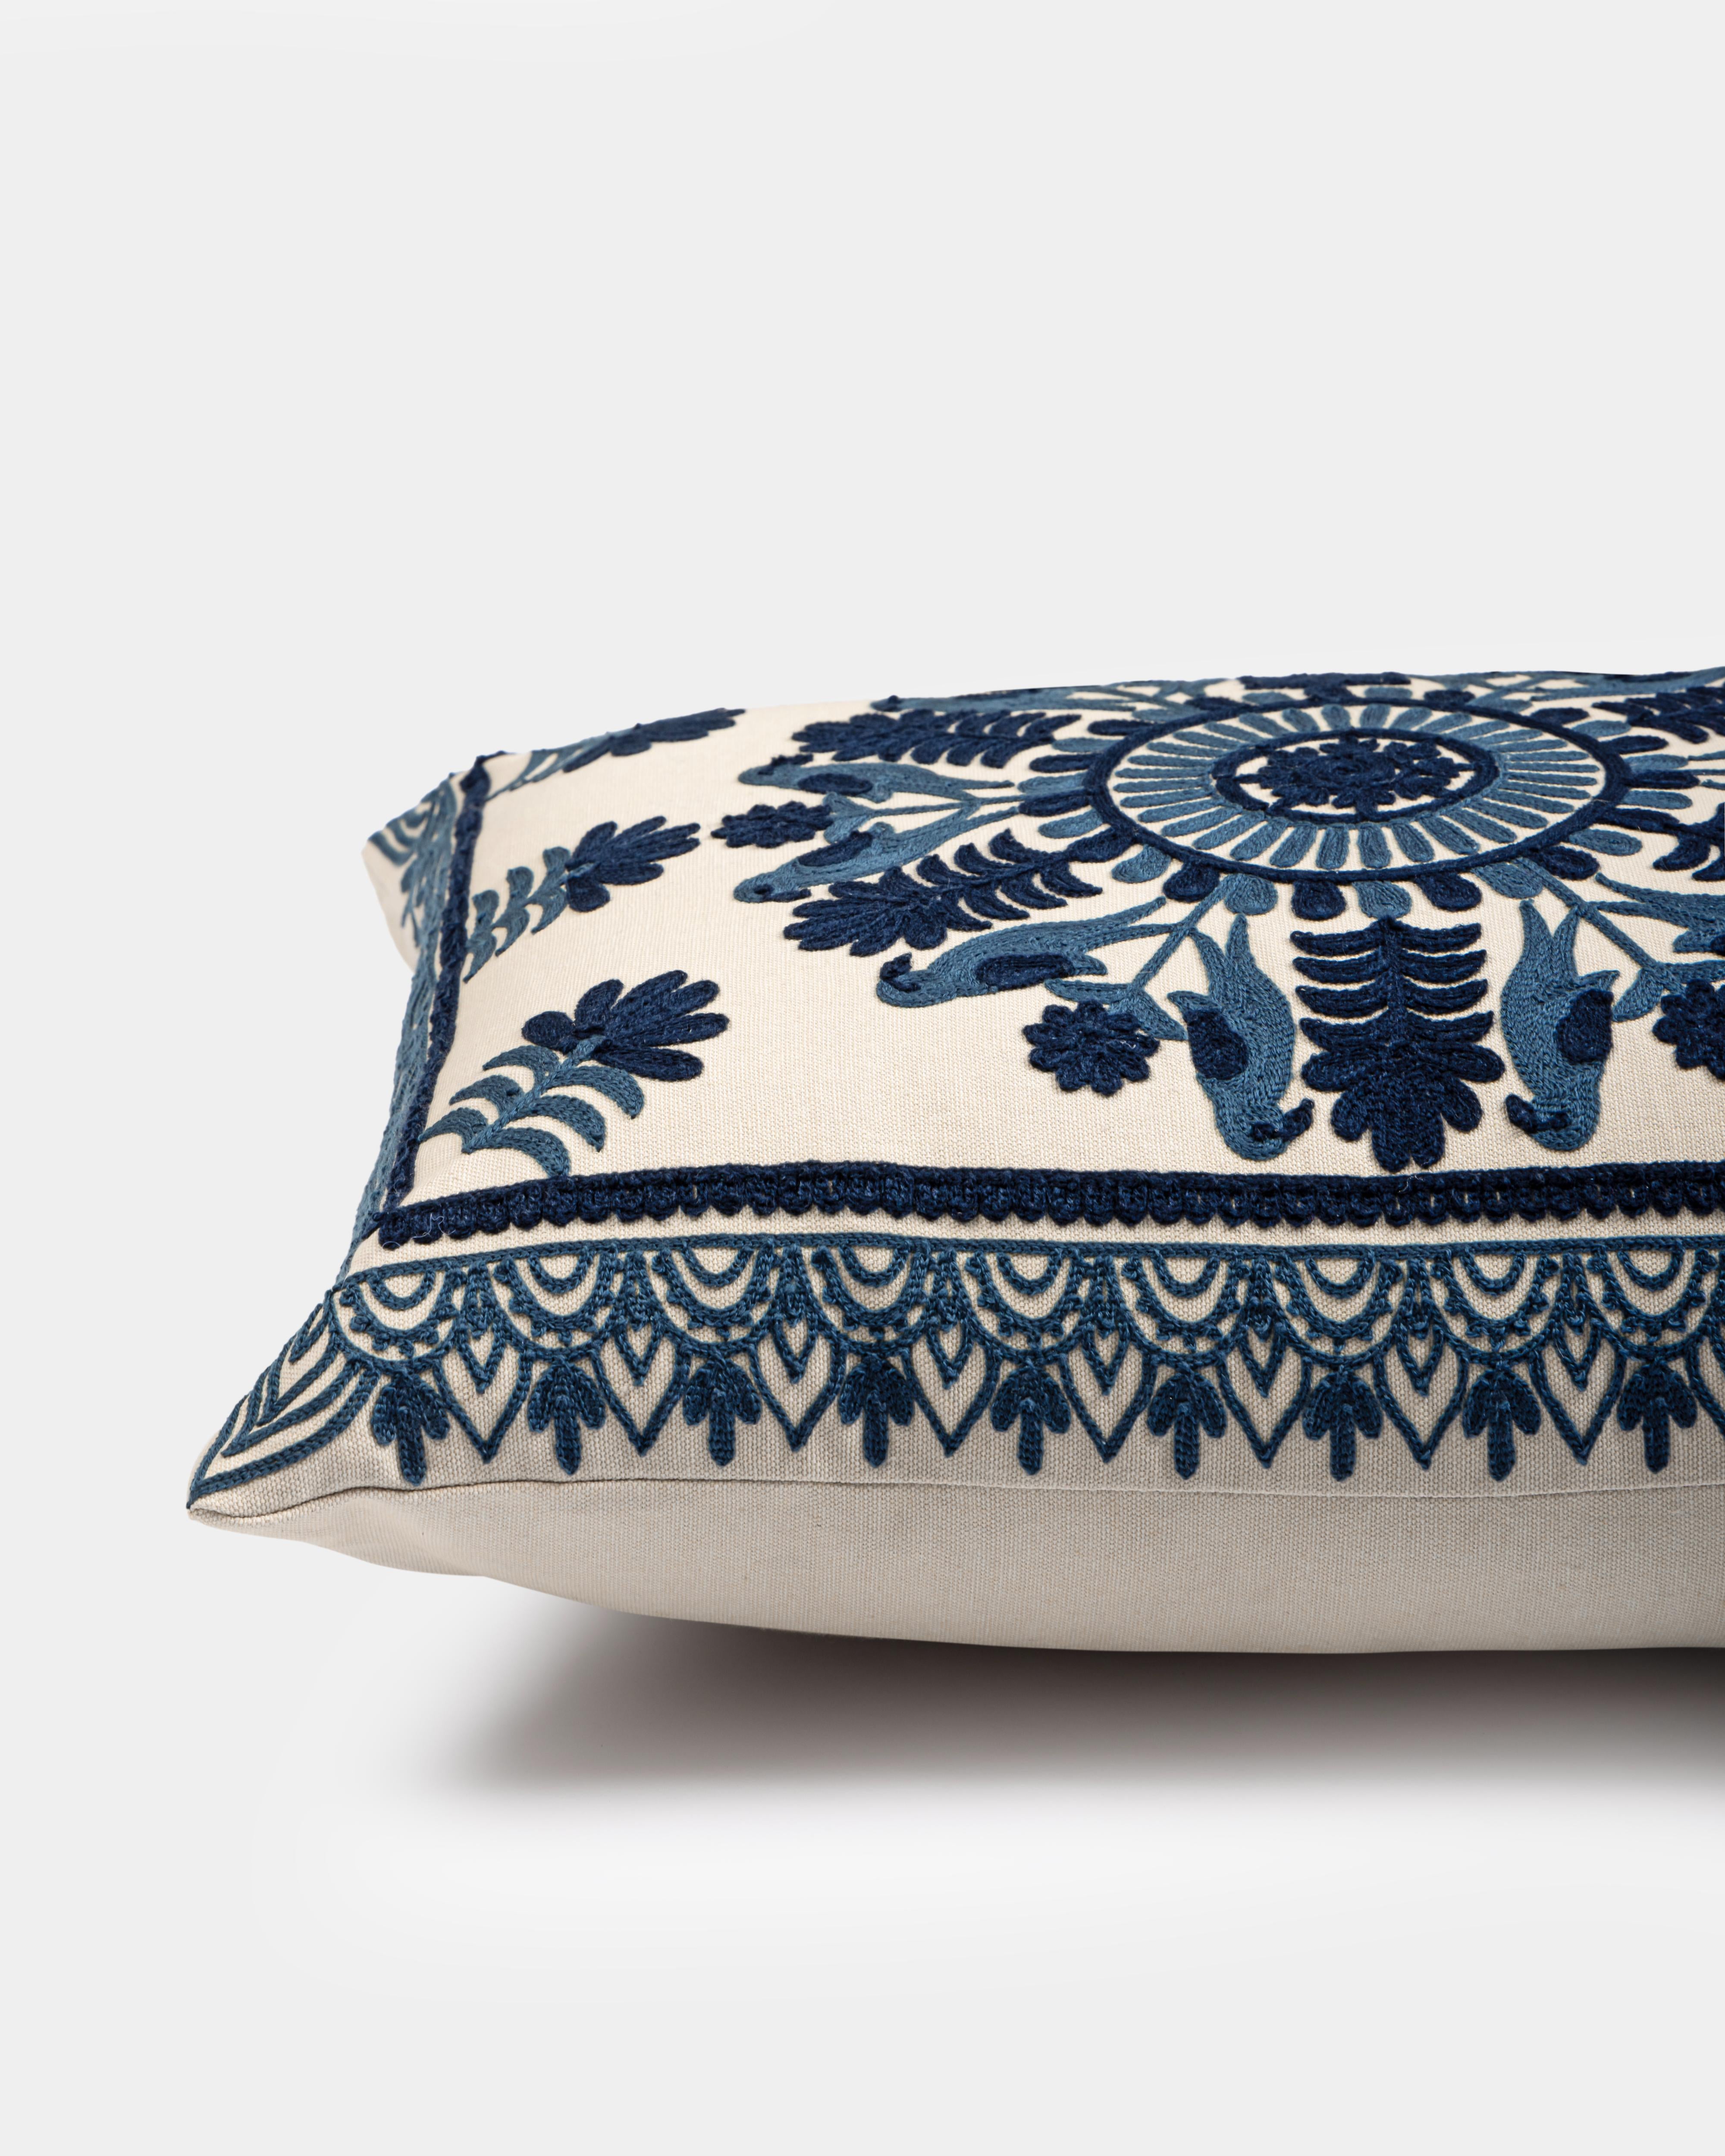 Suzani Pillow | Blue Pillow Cover Fauna 16x20" | Made in Jaipur